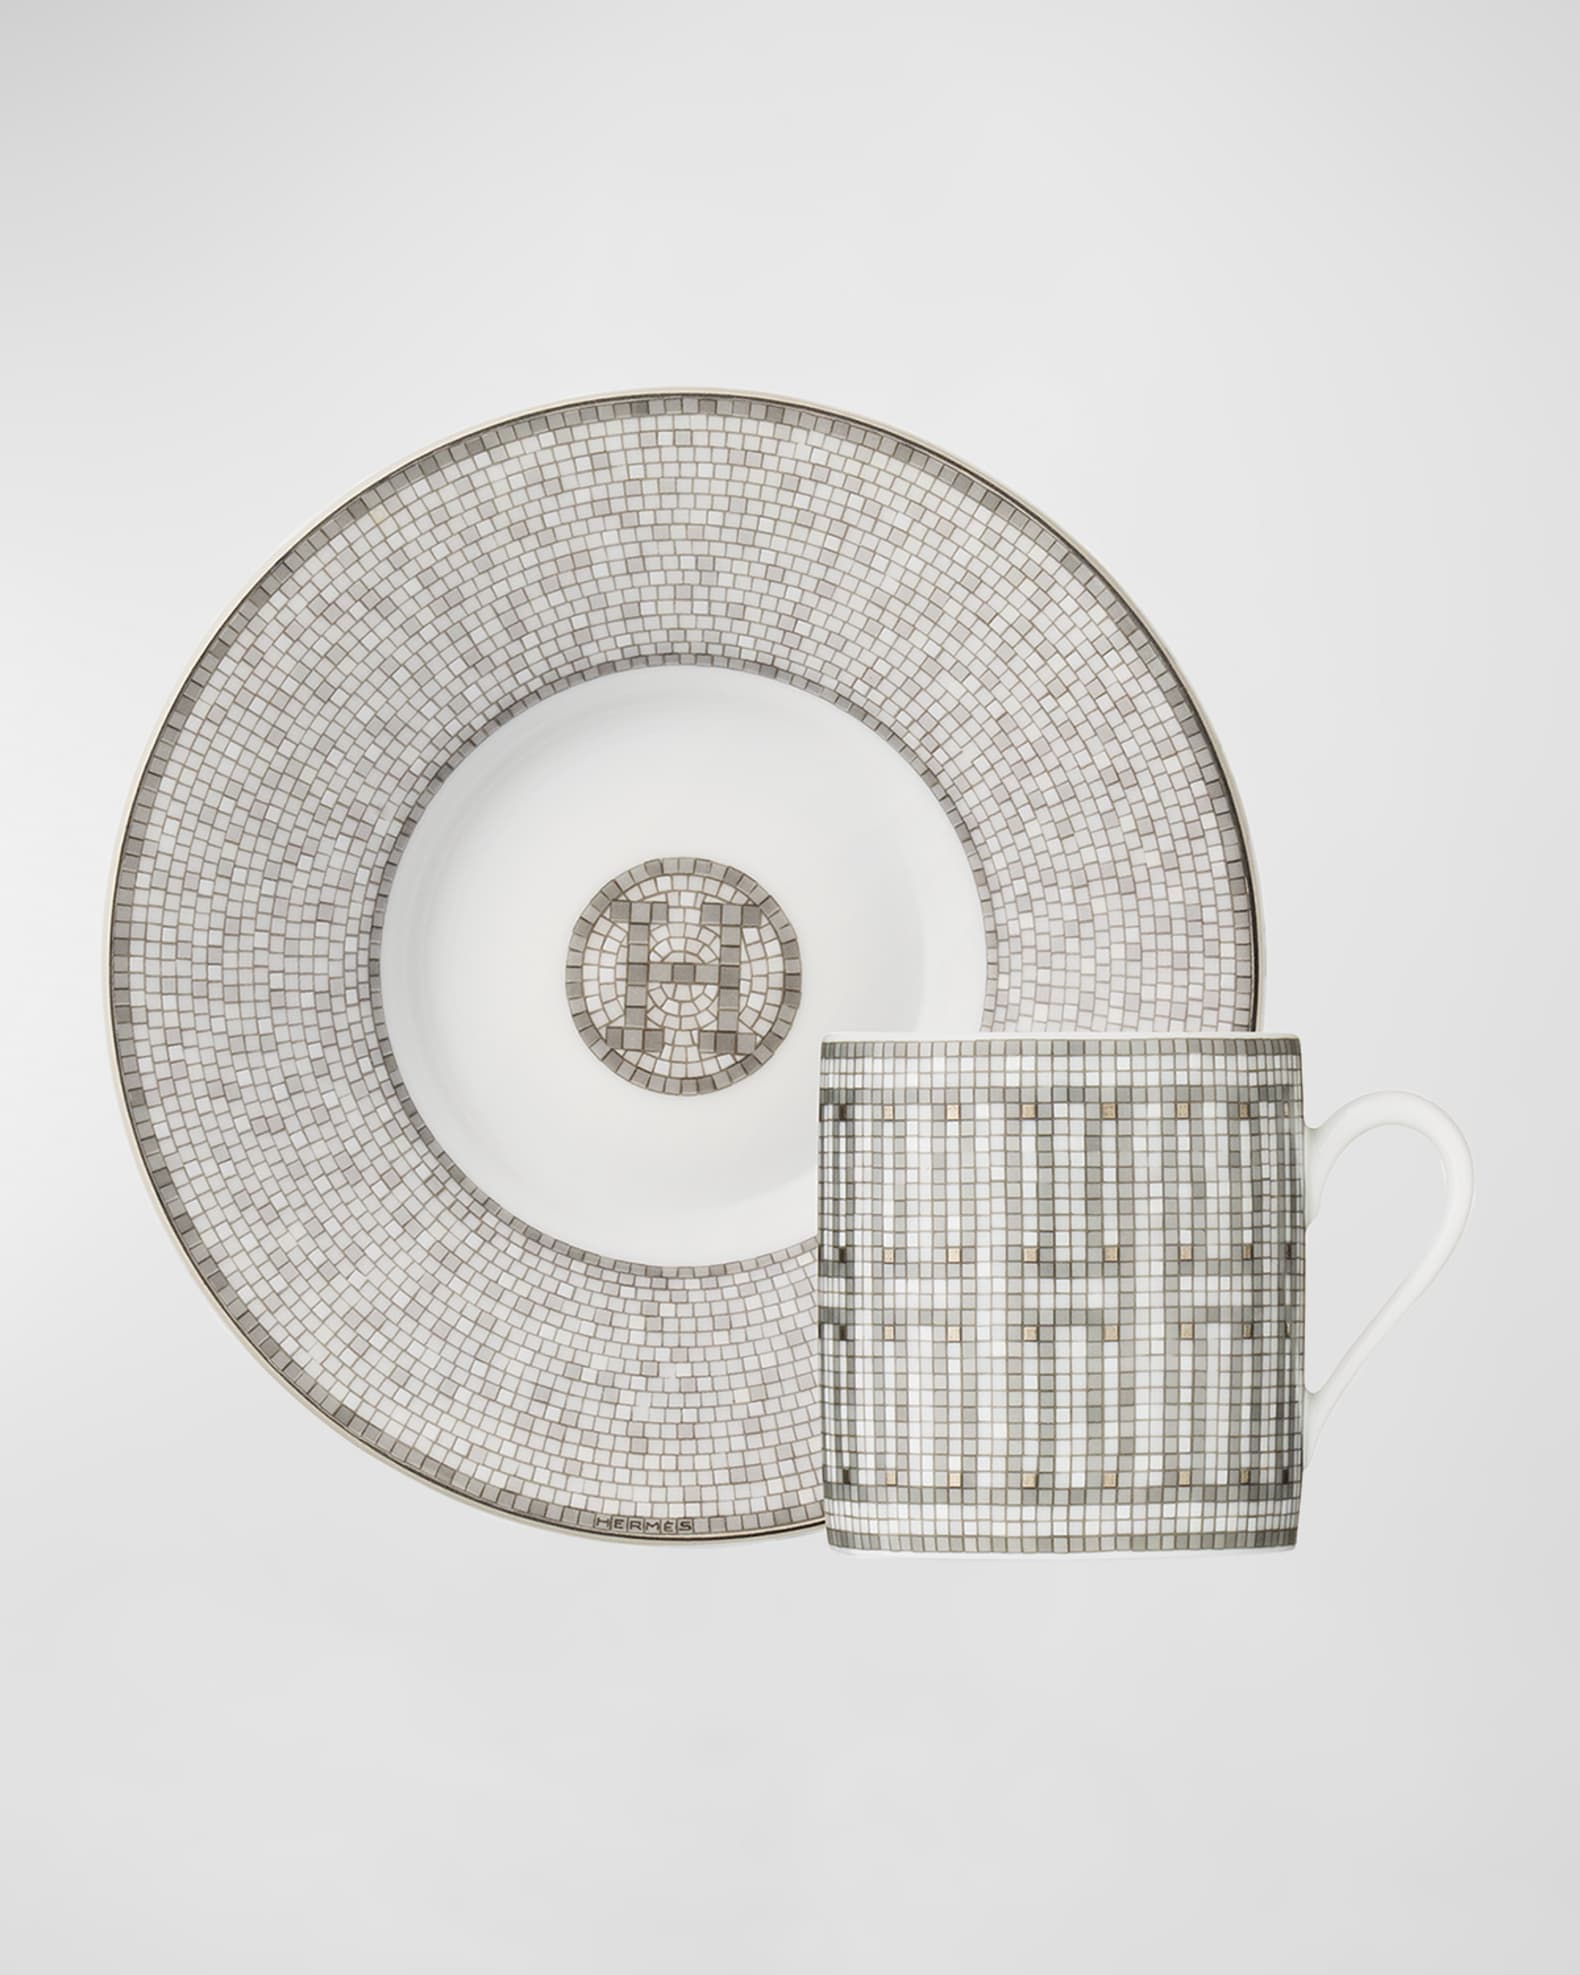 Mosaique au 24 platinum coffee cup and saucer